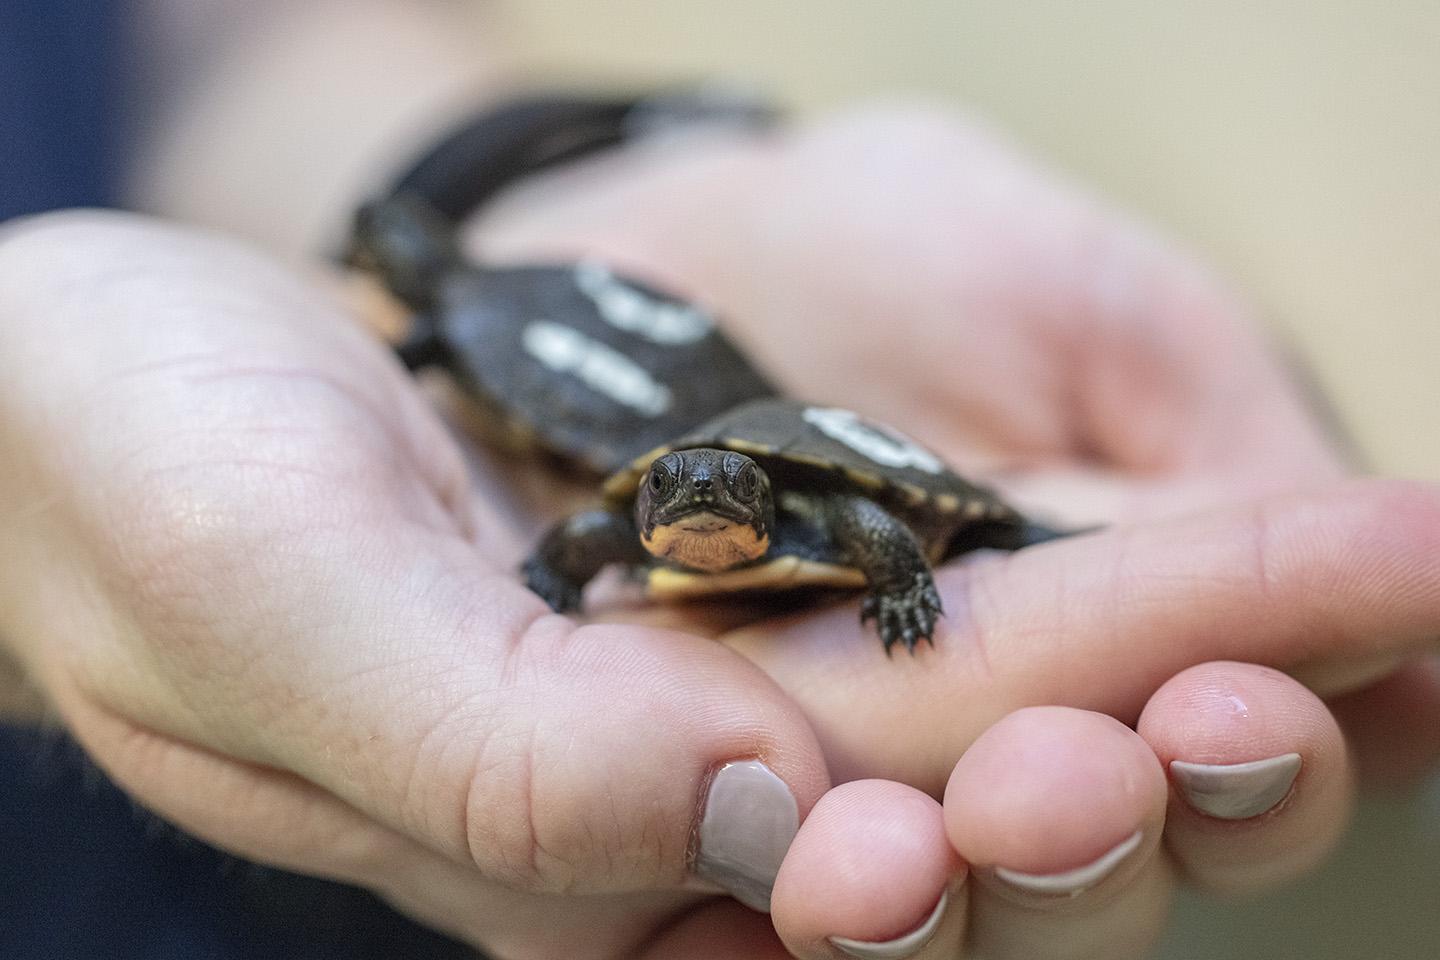 A group of 24 Blanding's turtle hatchlings will live at Shedd Aquarium for one year until they are ready to be released at a protected site in a DuPage County forest preserve. (Brenna Hernandez / Shedd Aquarium)